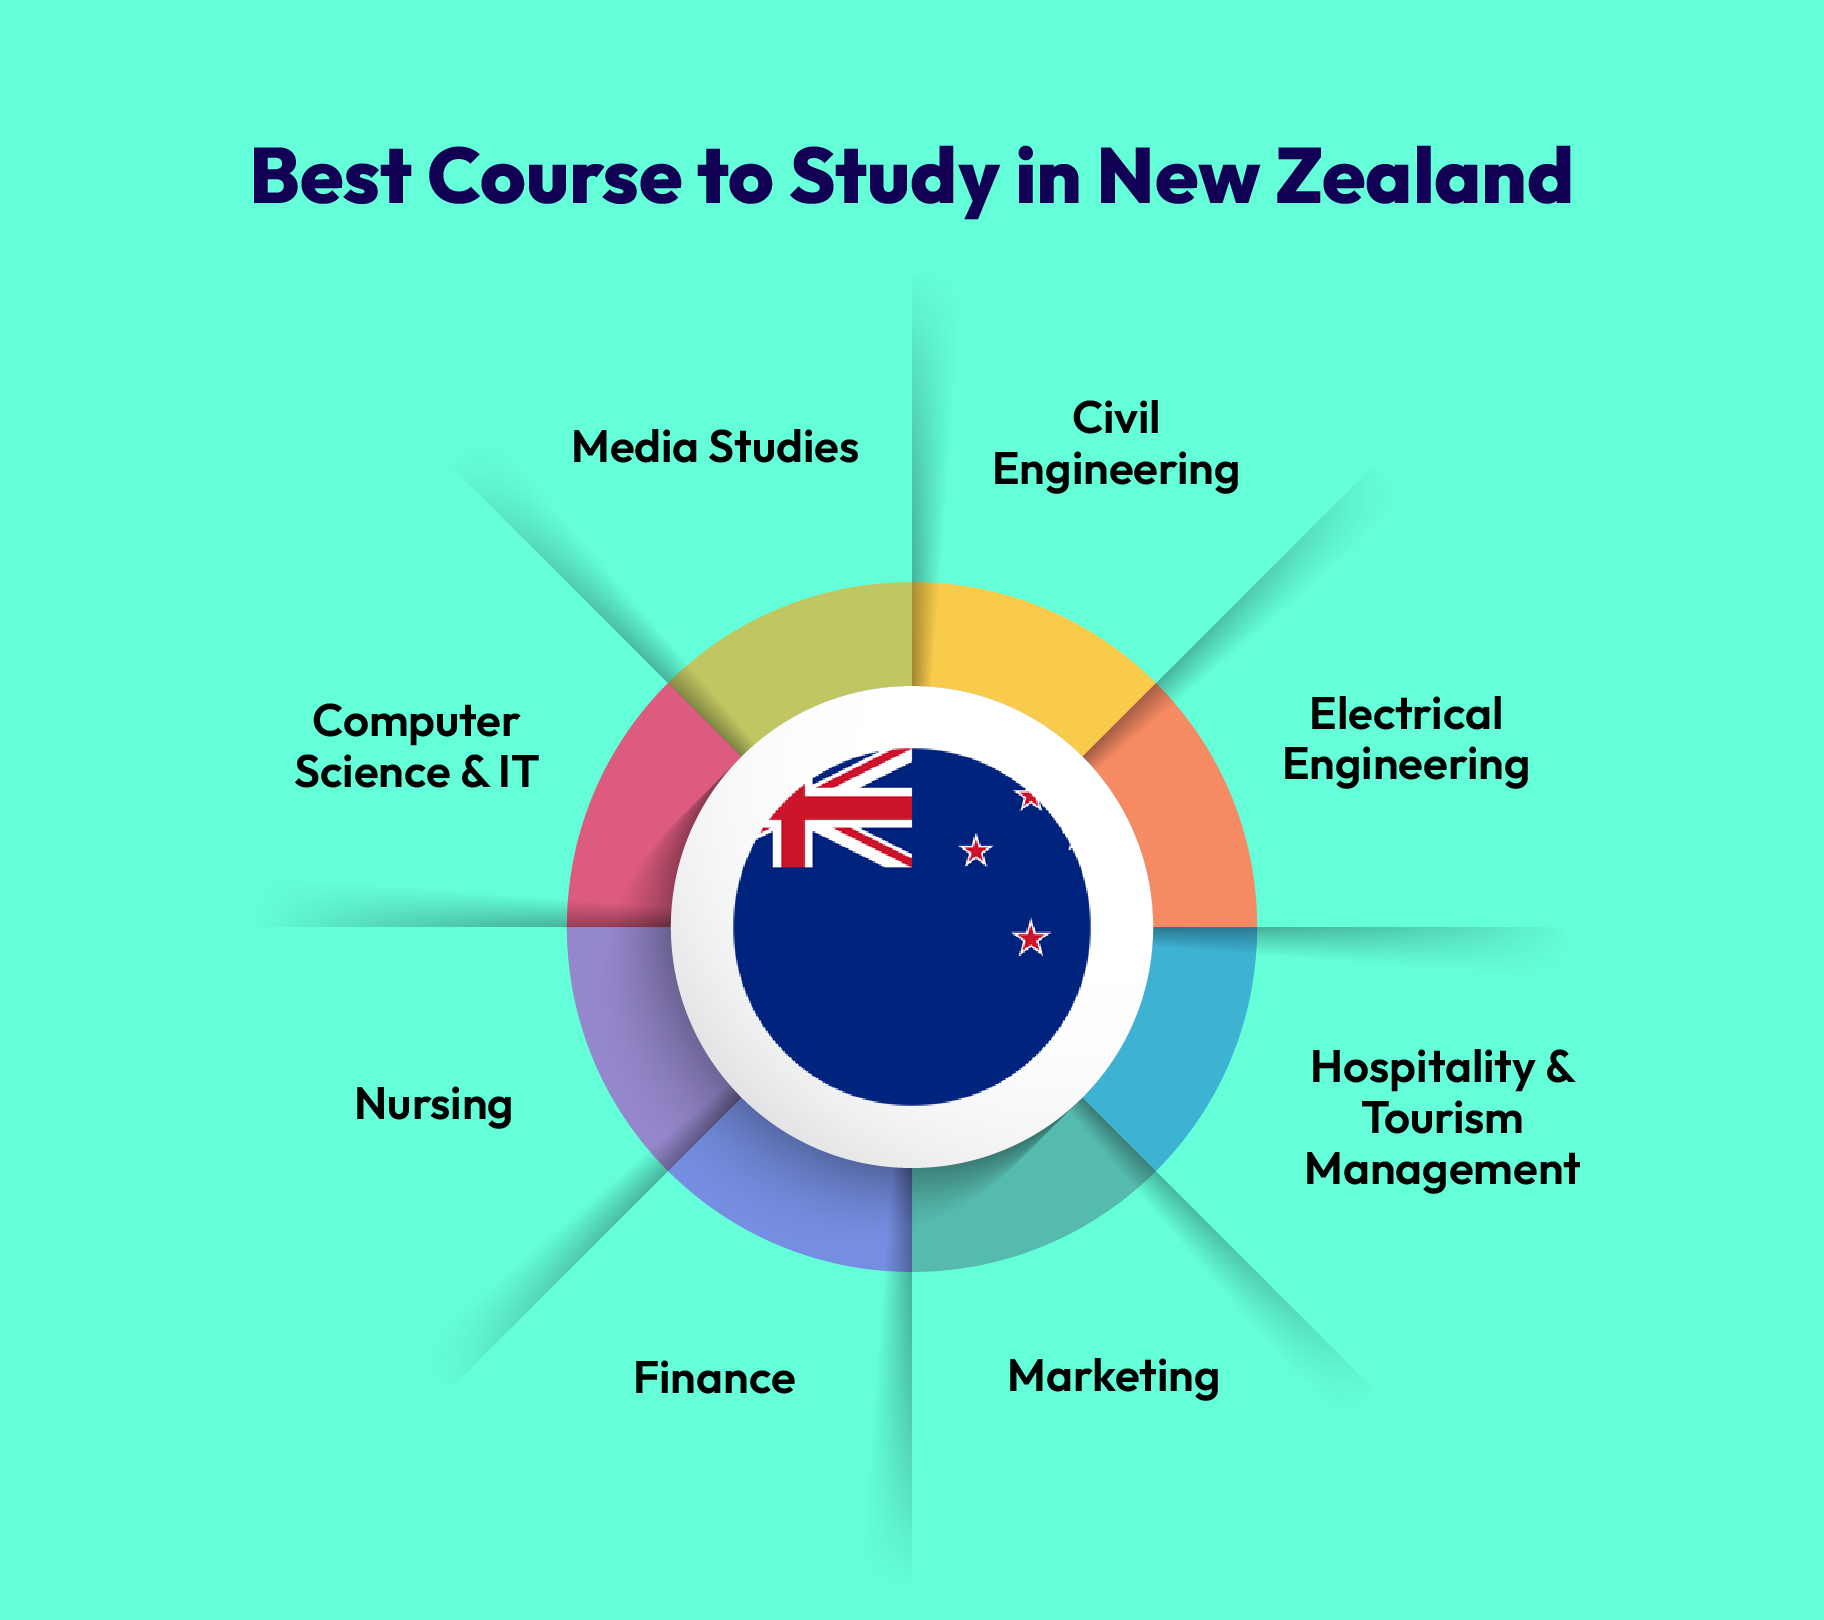 Best Course to Study in New Zealand